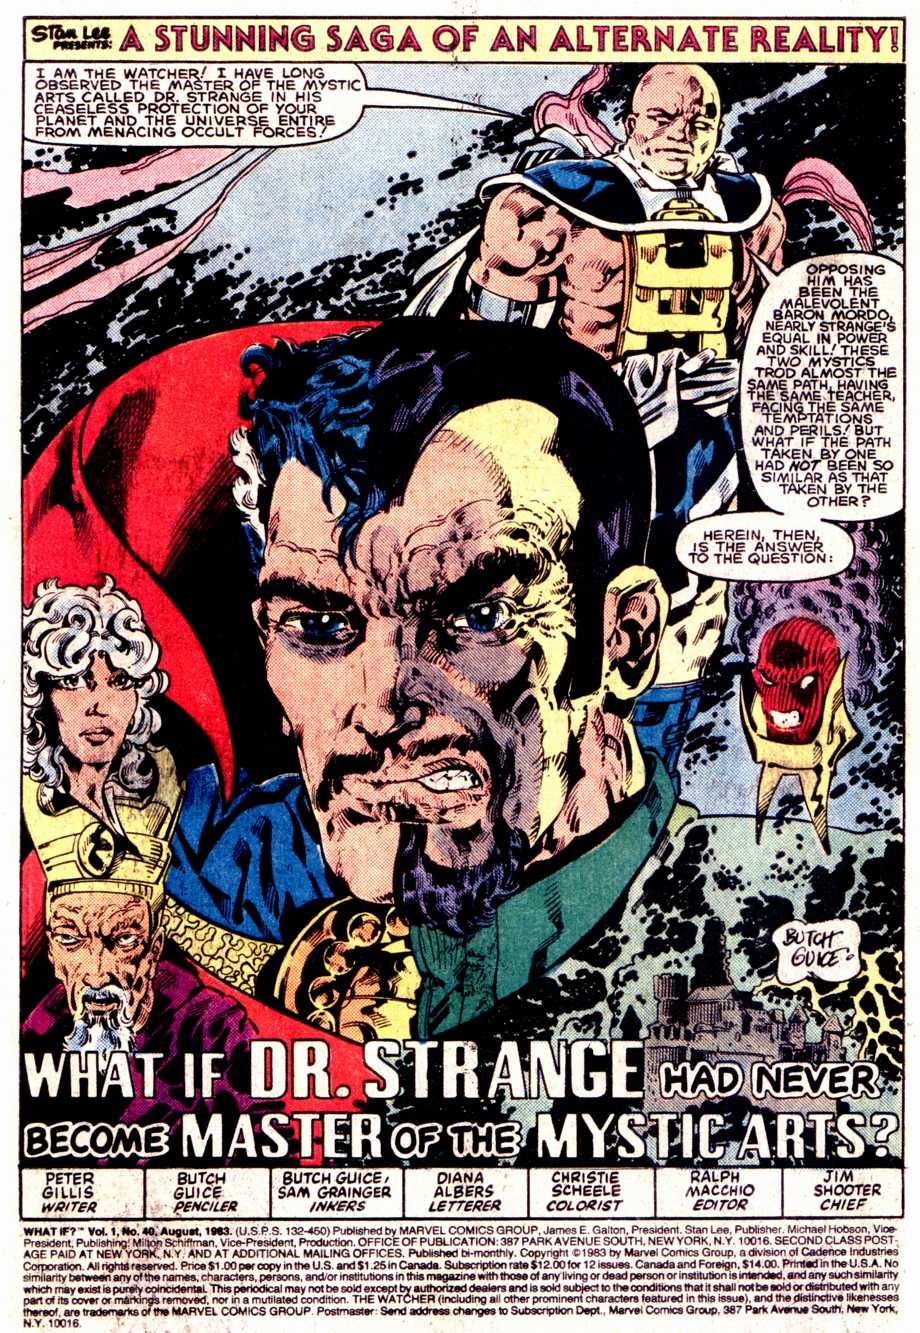 What If? (1977) issue 40 - Dr Strange had not become master of The mystic arts - Page 2